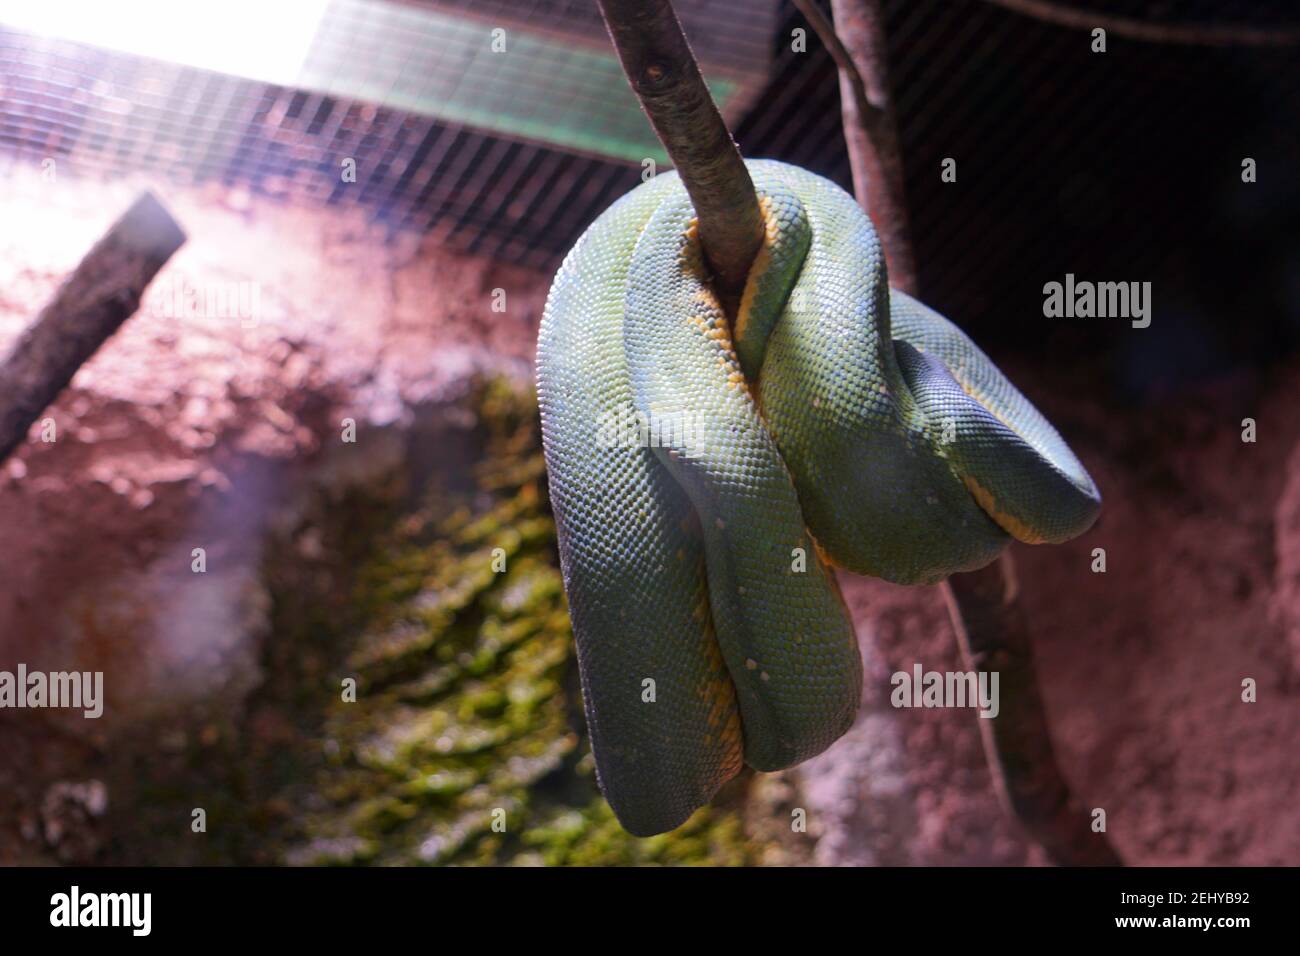 Snake Hanging on the tree Stock Photo Stock Images Stock Pictures Stock Photo